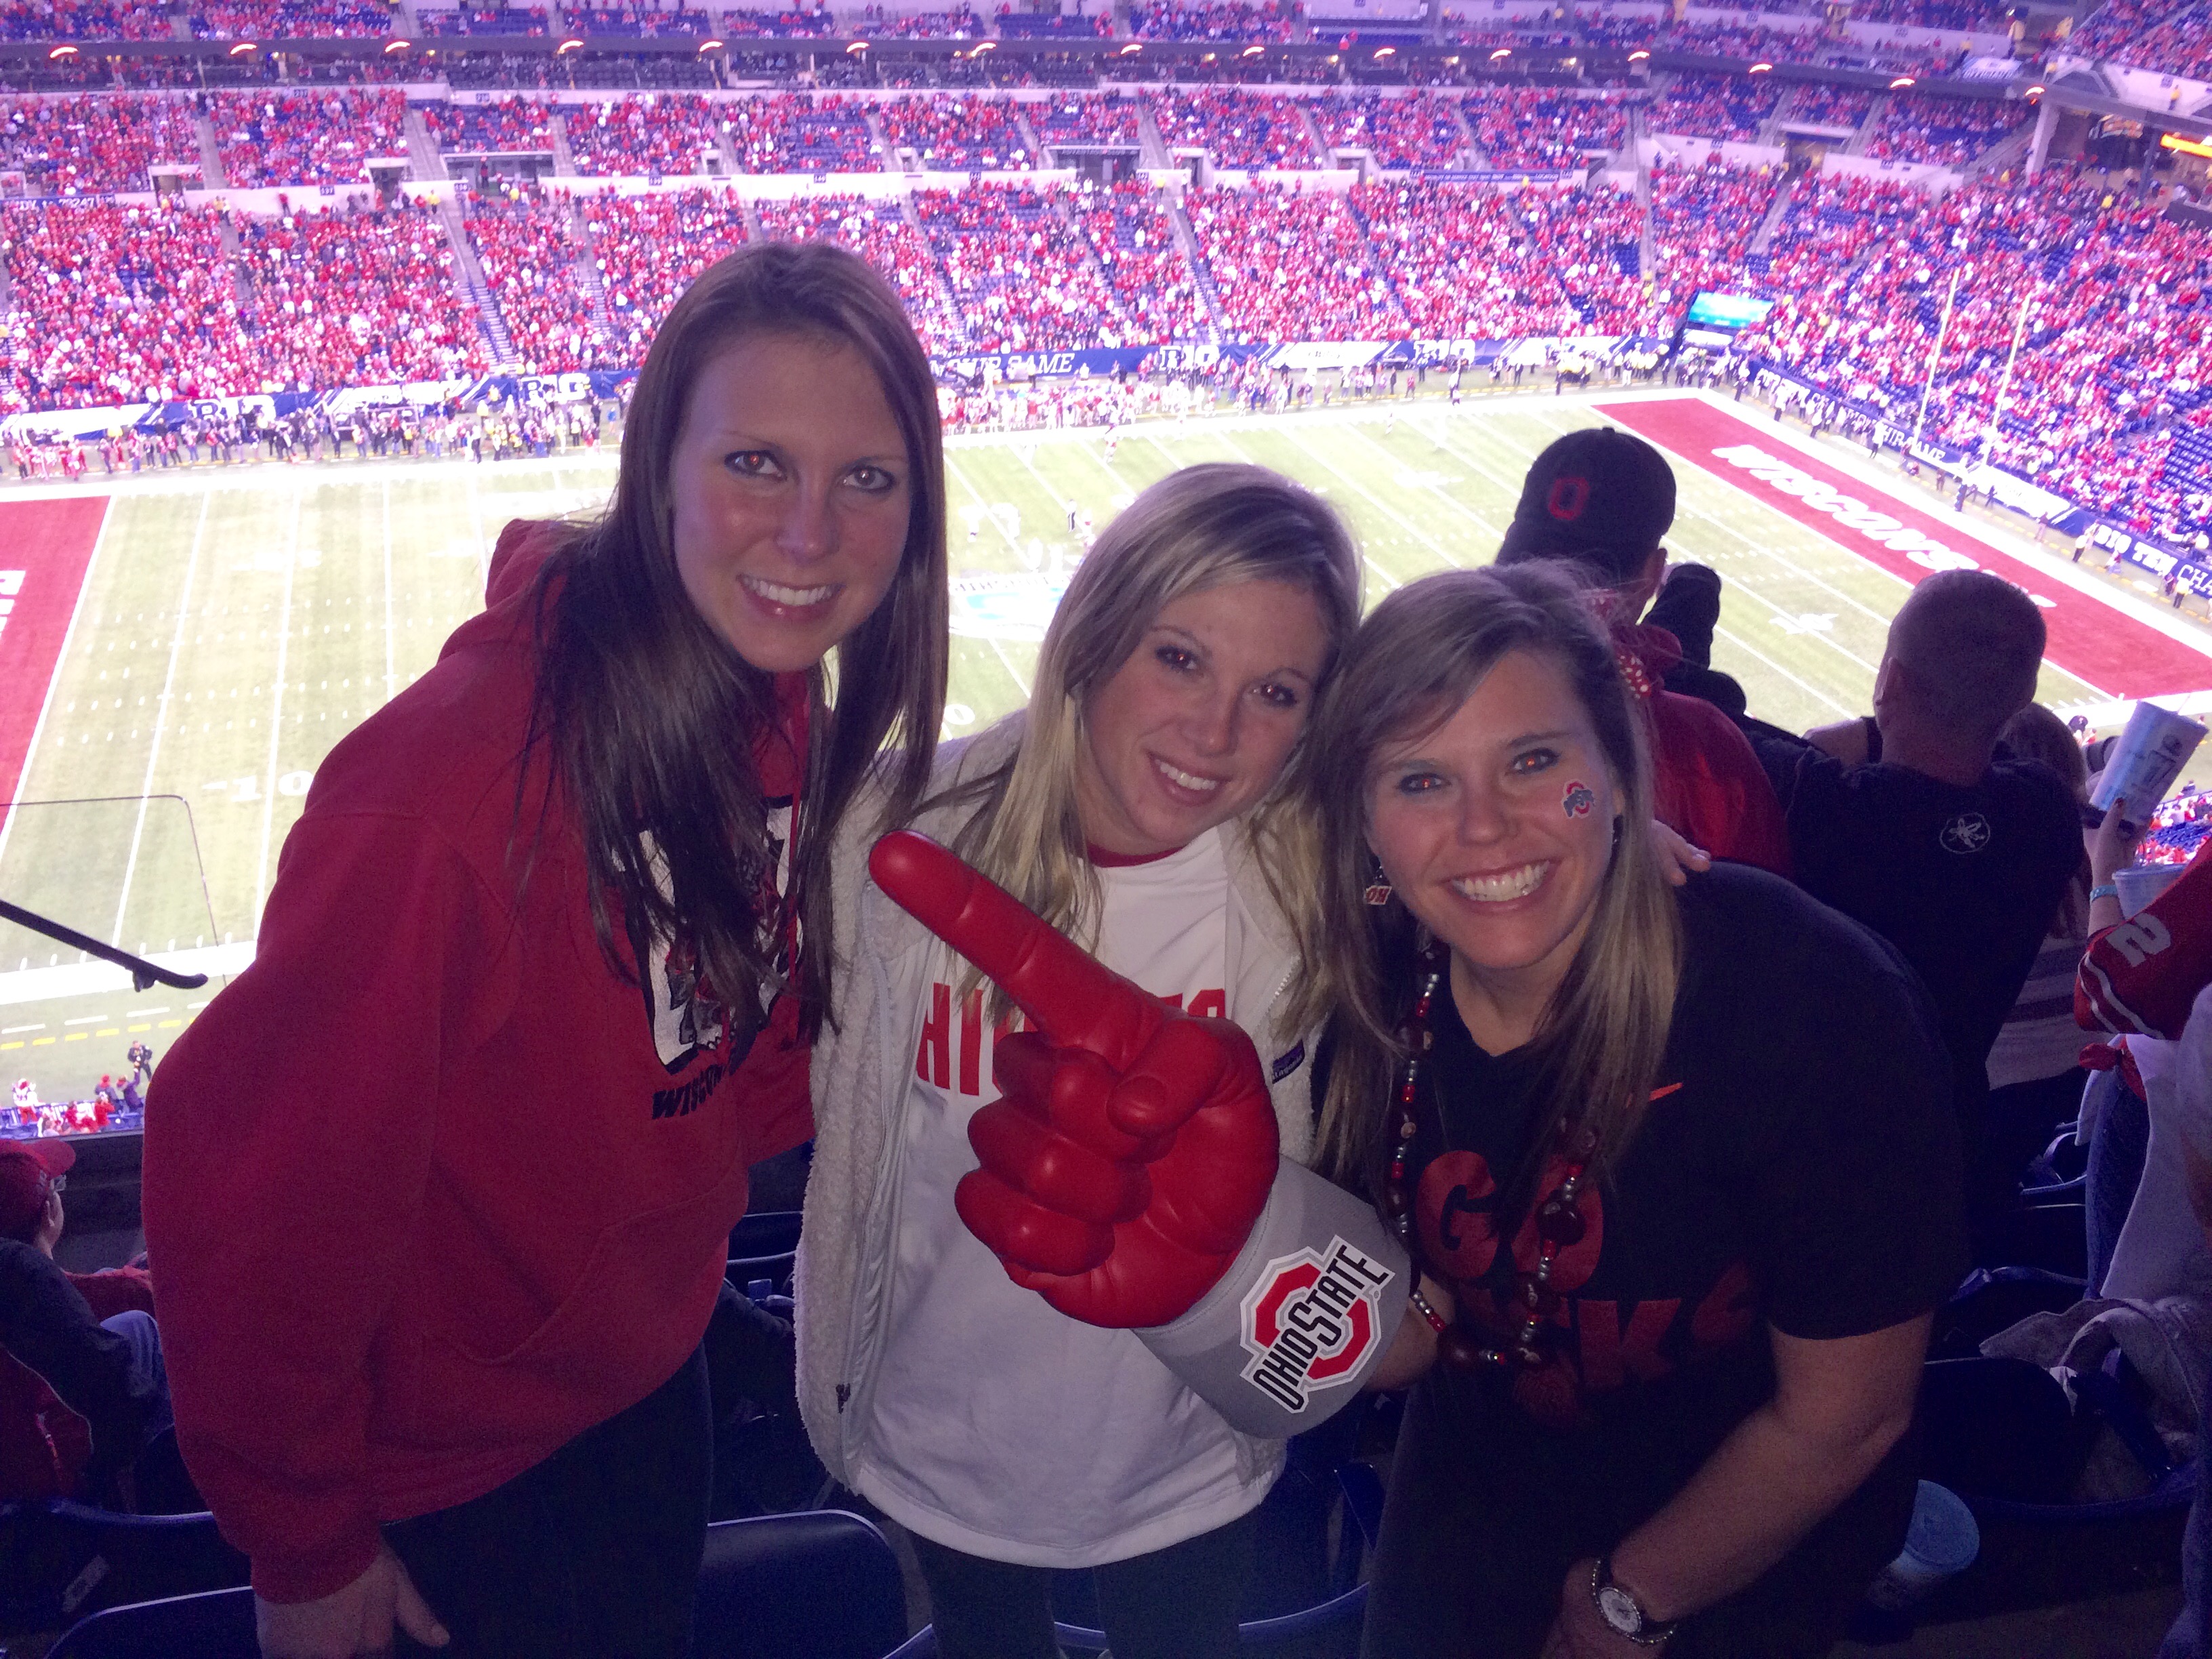 This is a picture of myself with two of my roommates, Nicole and Corrie. We were very lucky to be able to attend the Big 10 Tournament Game in Indianapolis, IN in December!